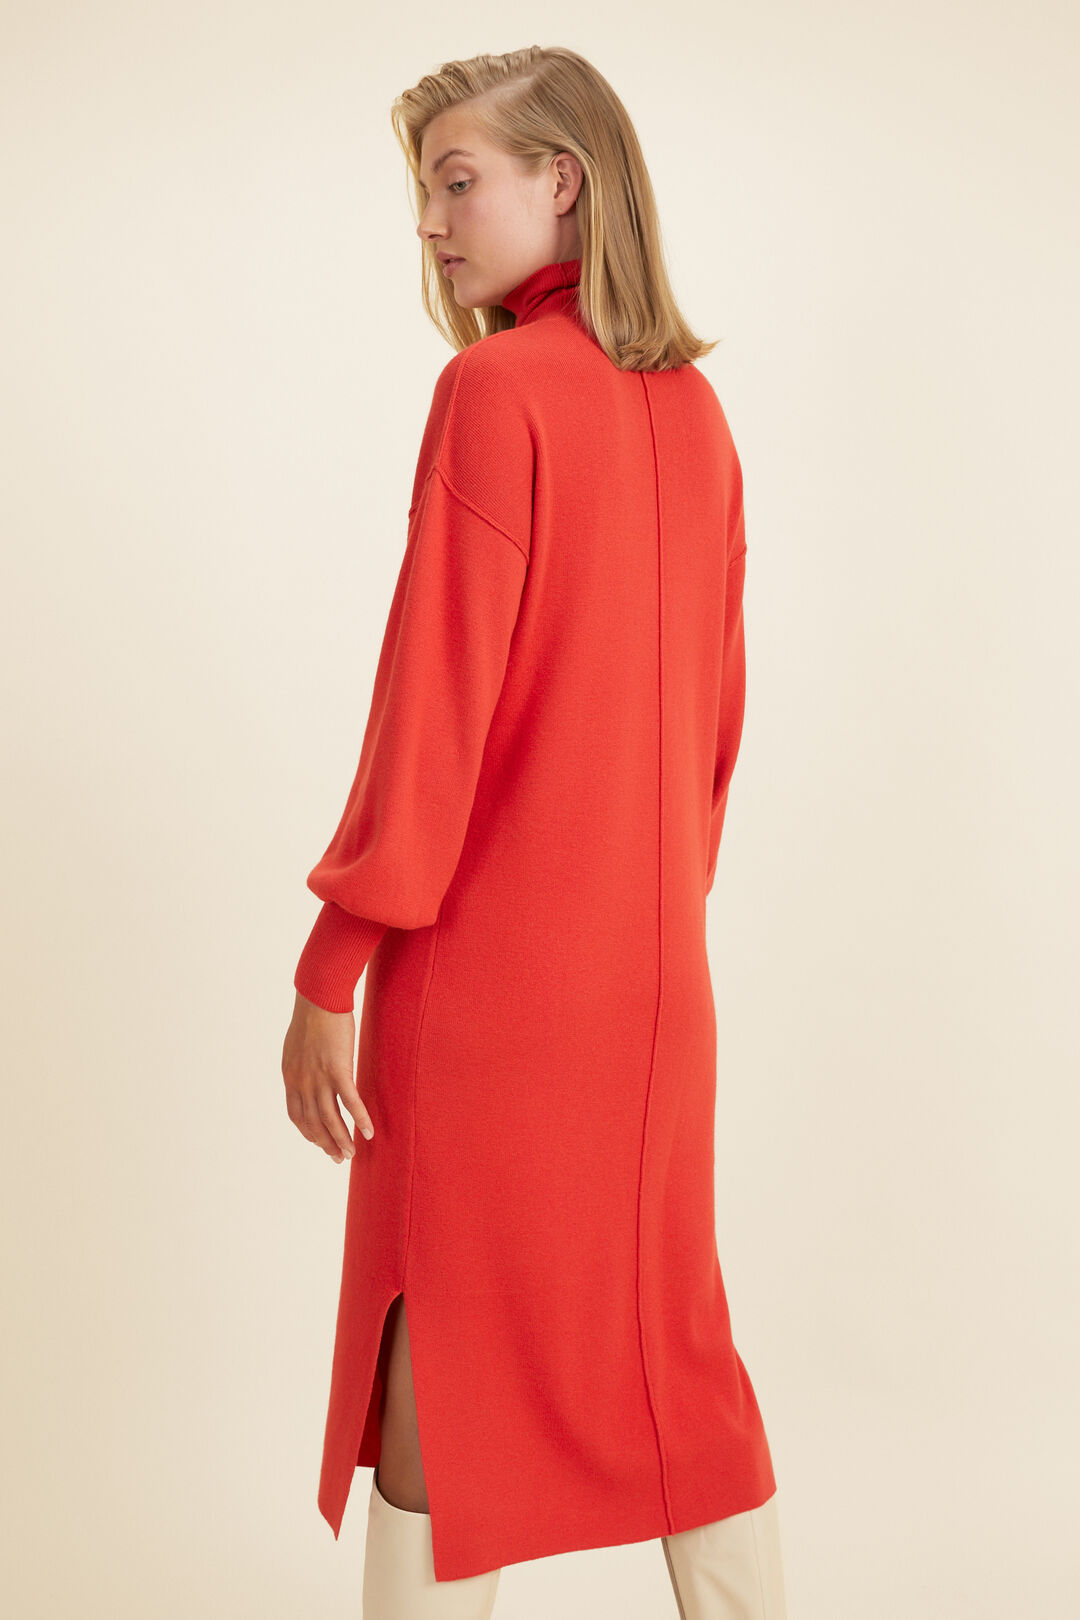 Slouchy Knit Midi Dress   Candy Red  hi-res